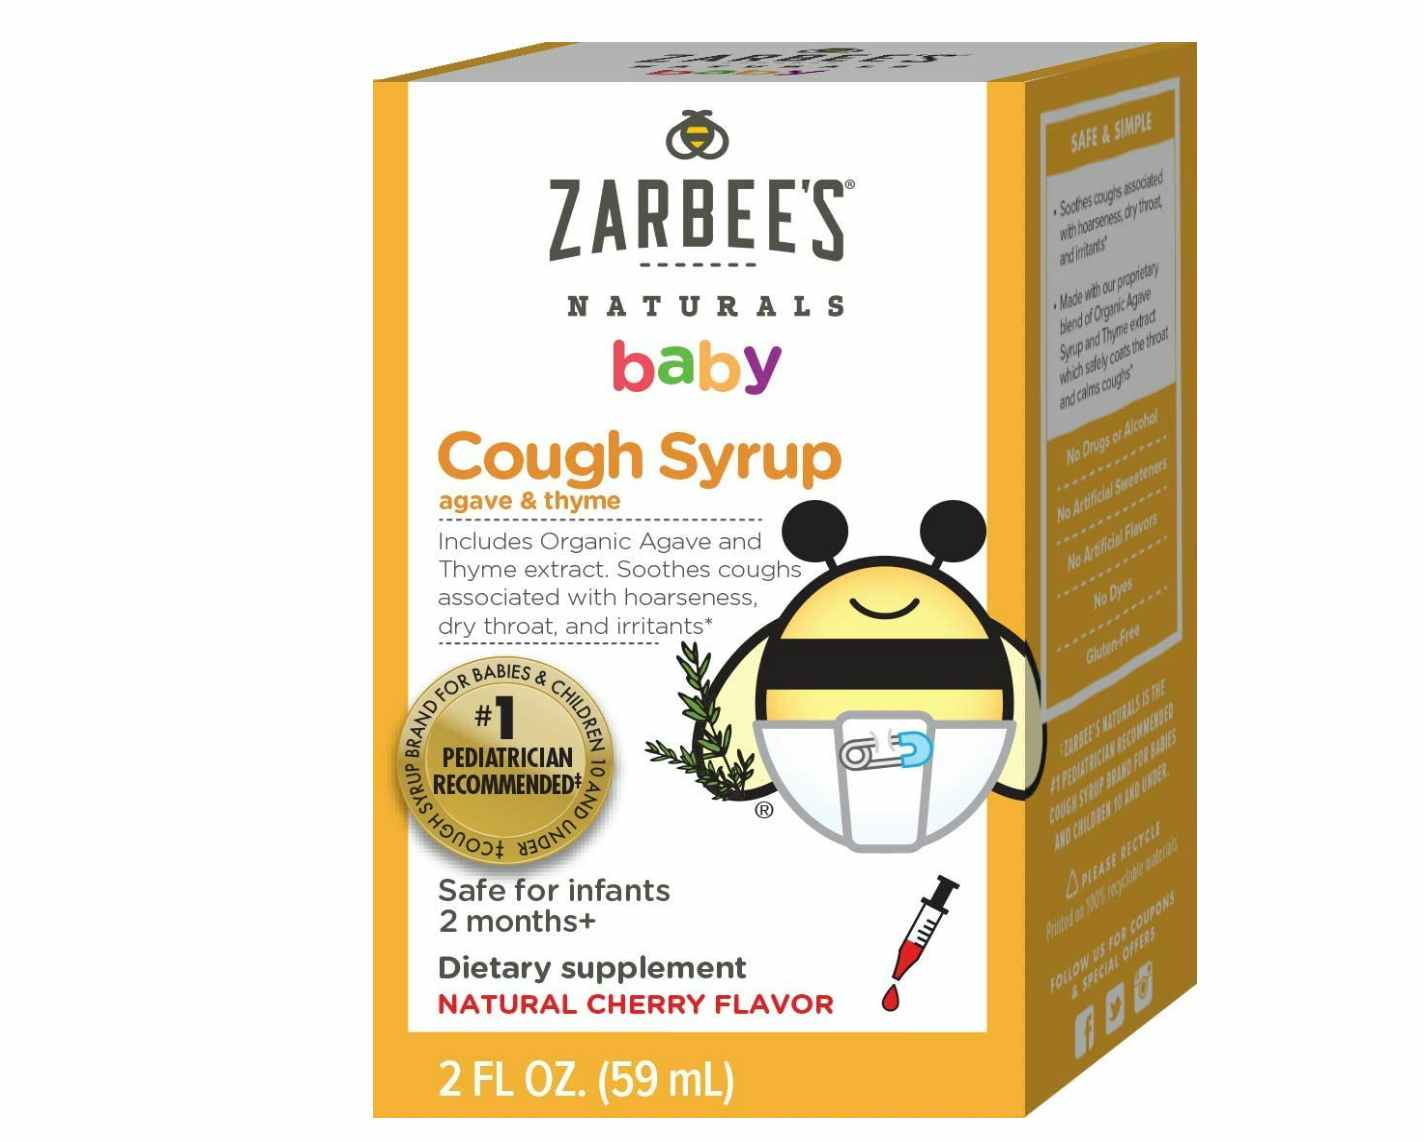 Zarbee's Naturals Baby Cough Syrup